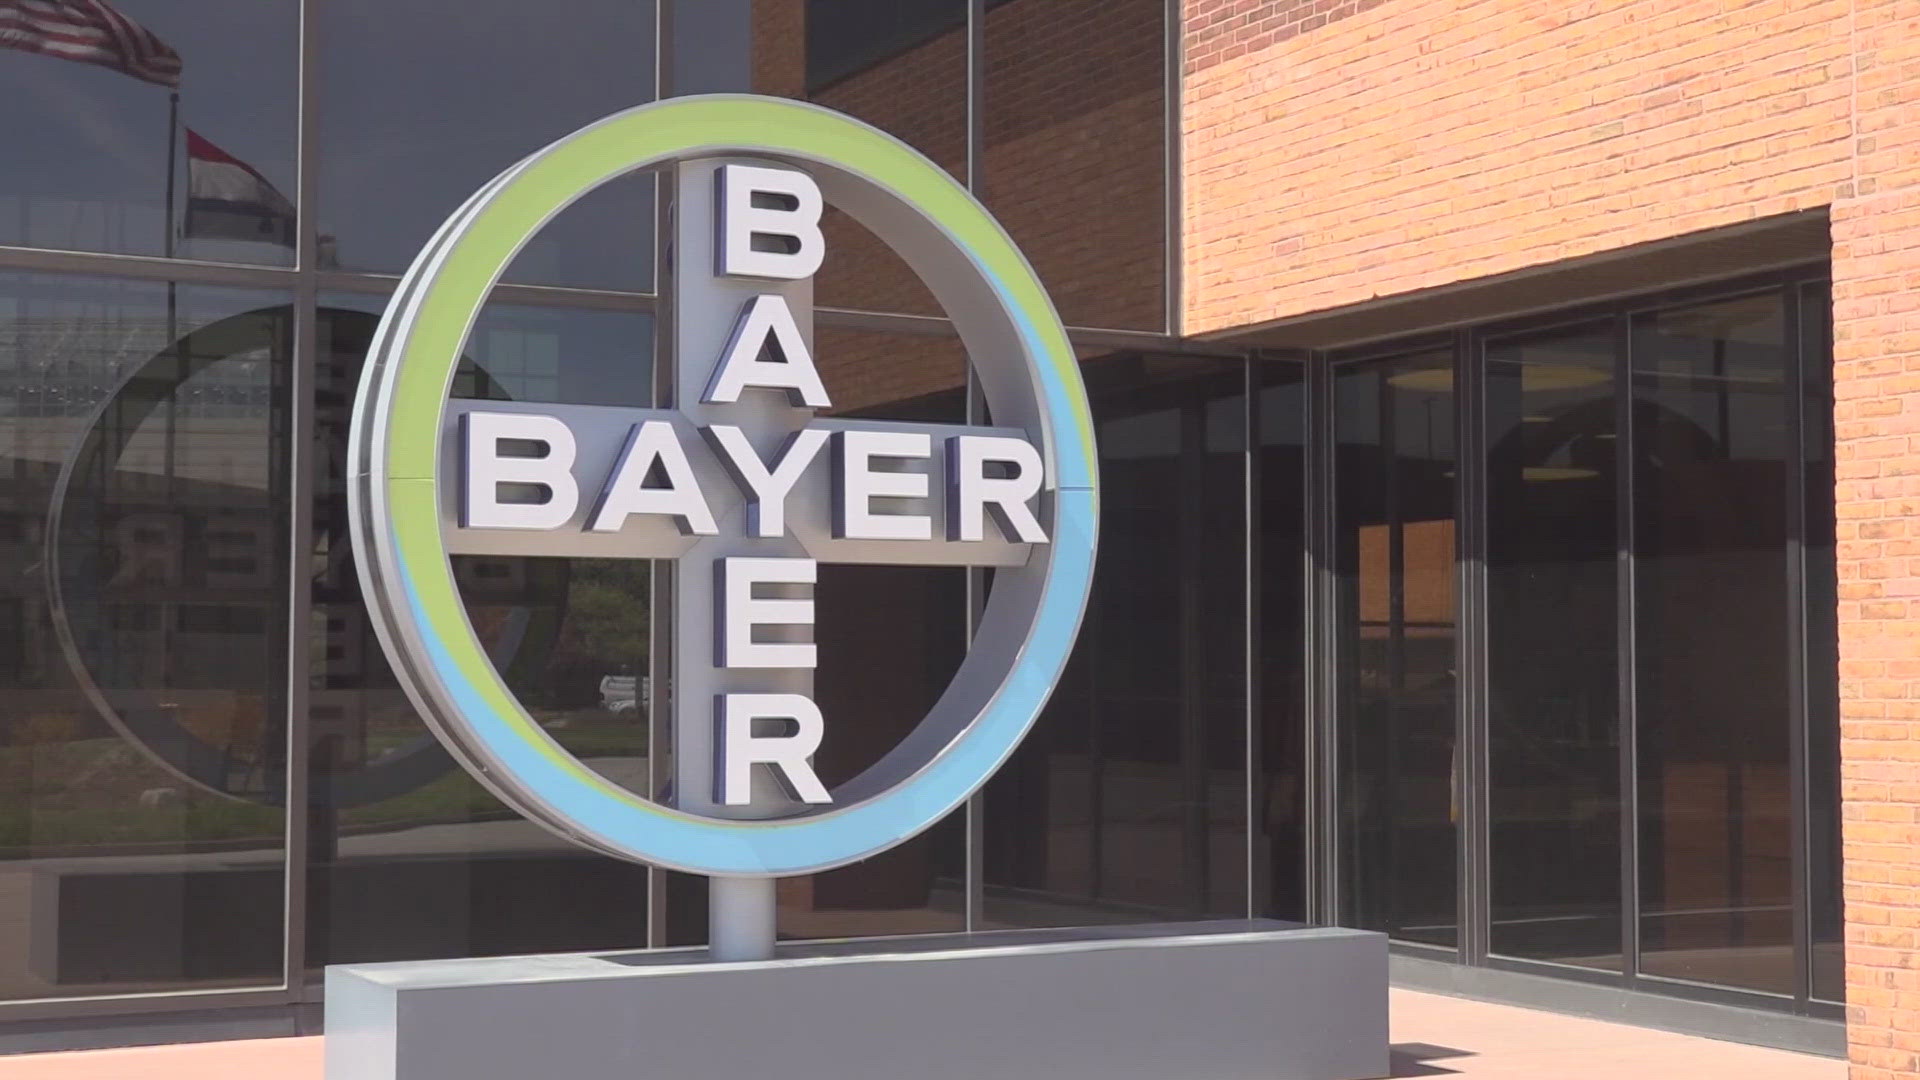 Bayer just made cuts in local staffing. Bayer is also in the process of restructuring, according to a company spokesperson.